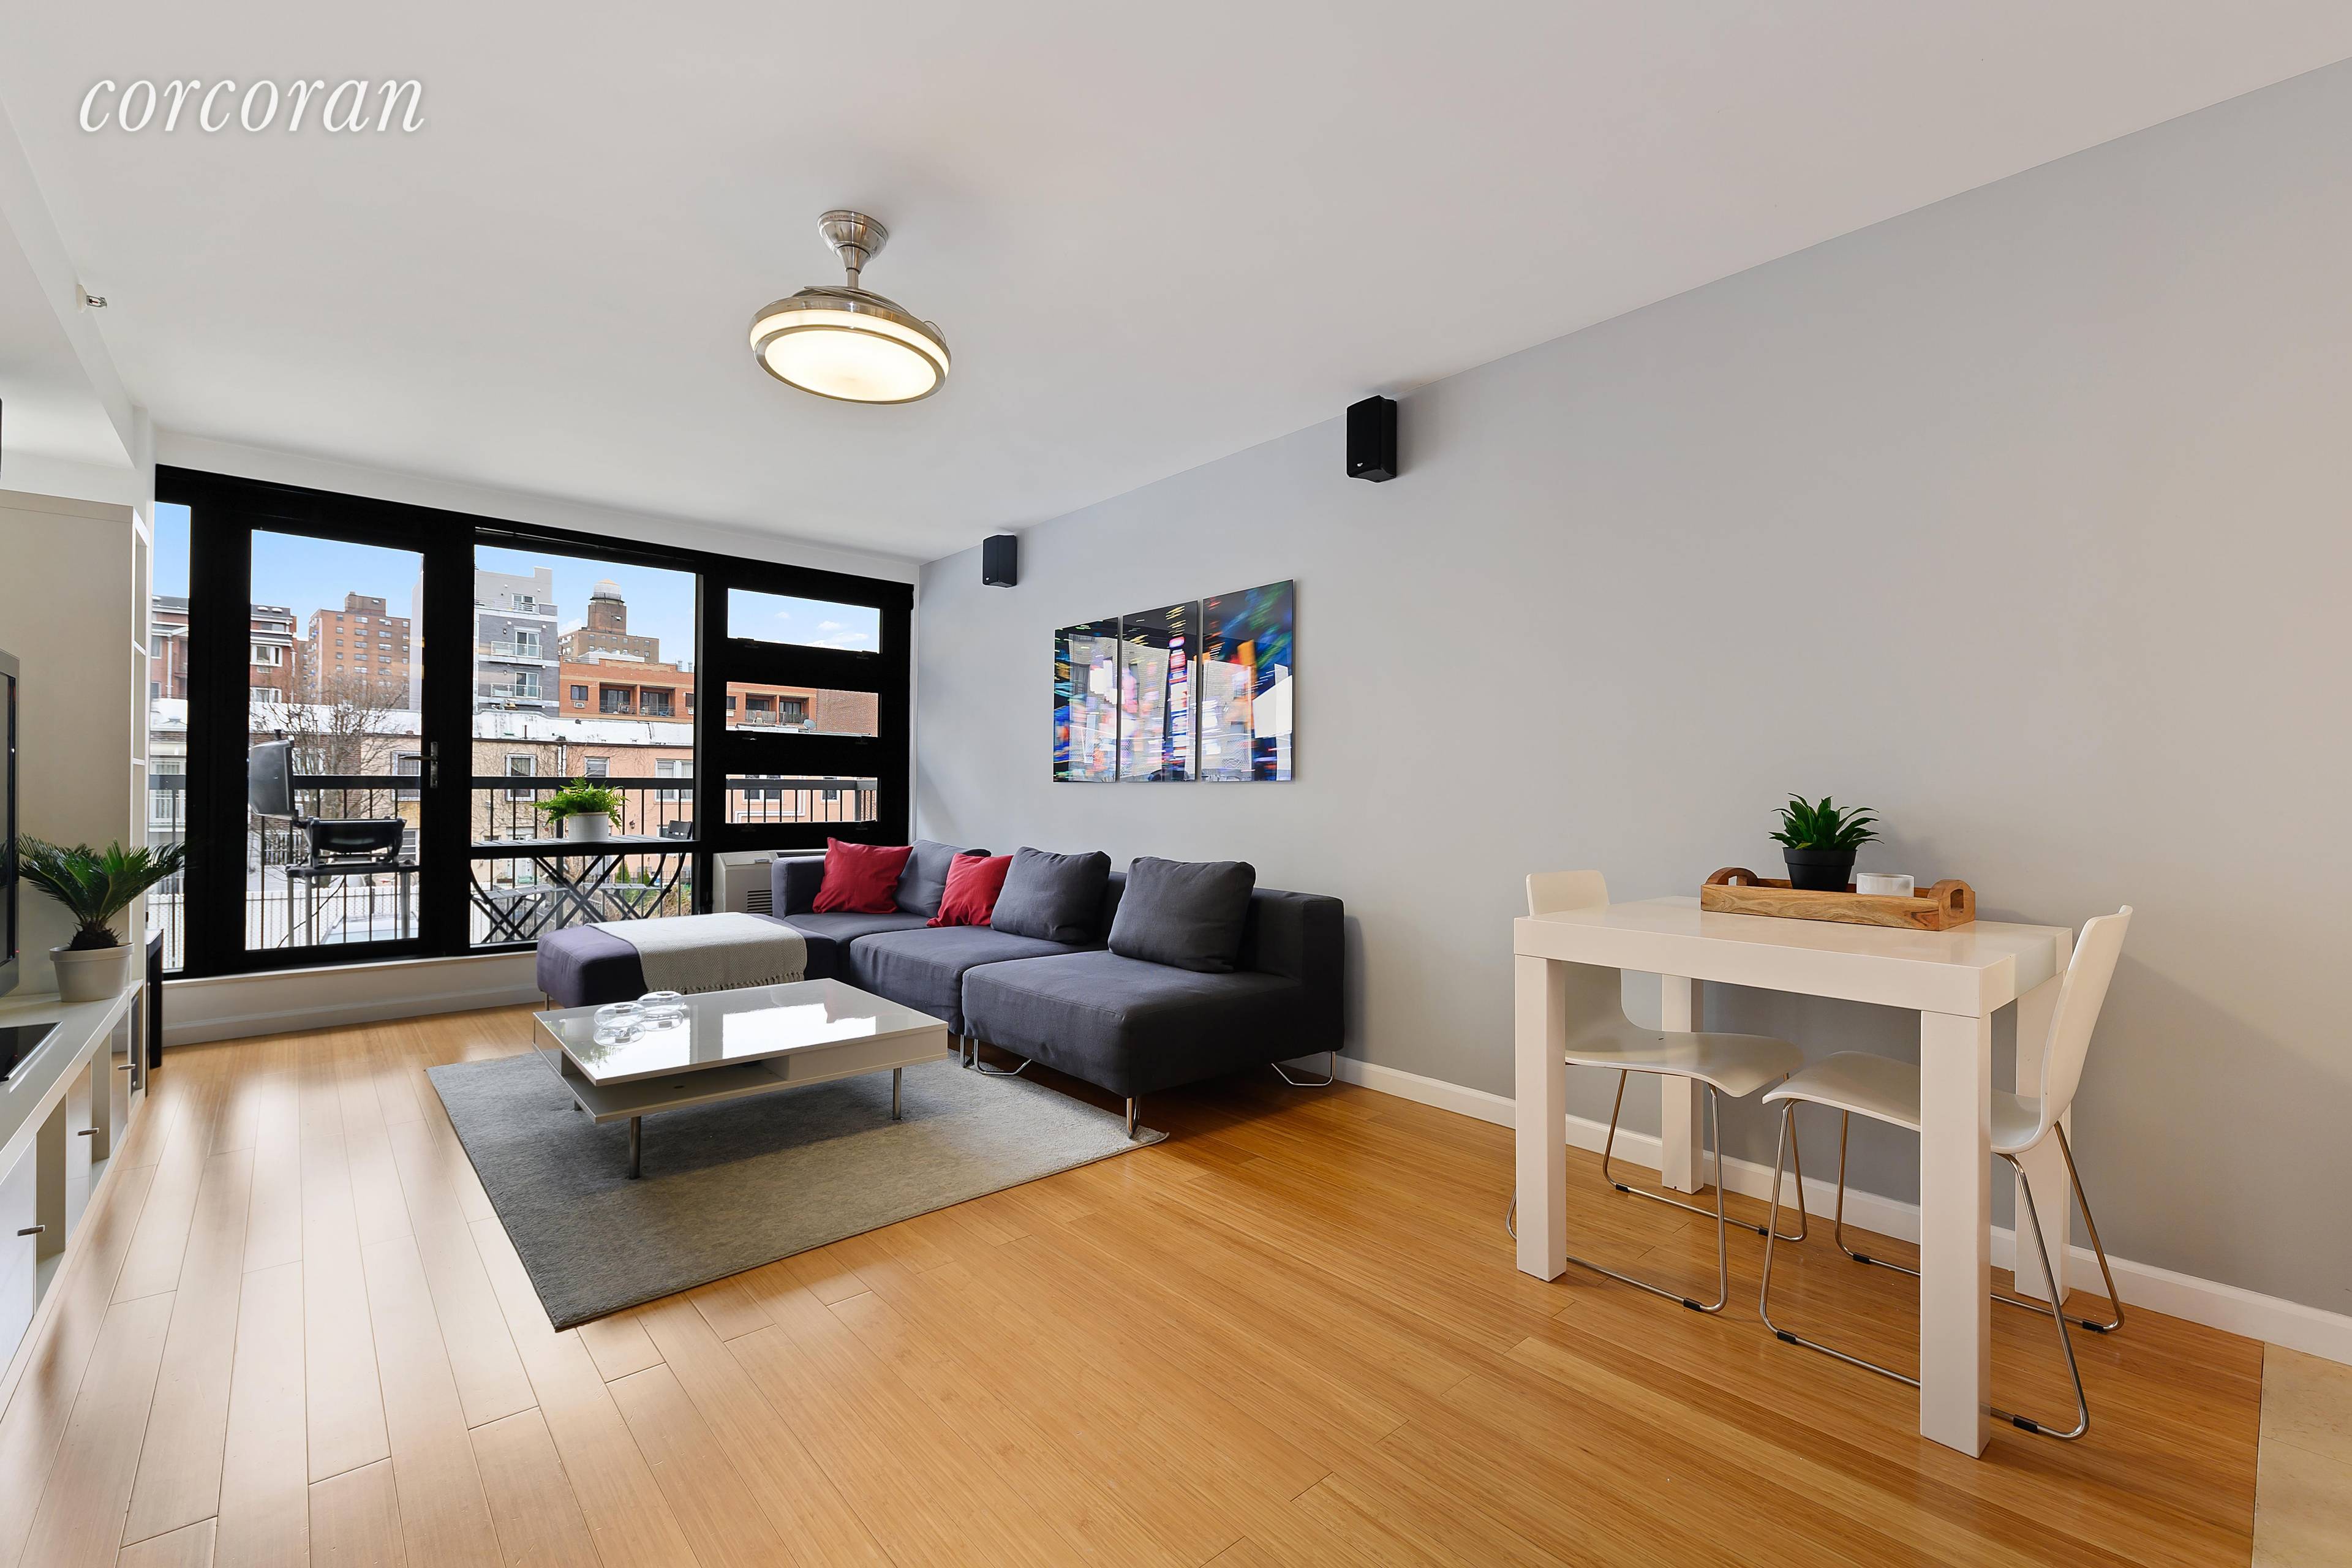 A spacious, modern one bedroom apartment with parking and storage can be yours in Prime Astoria.